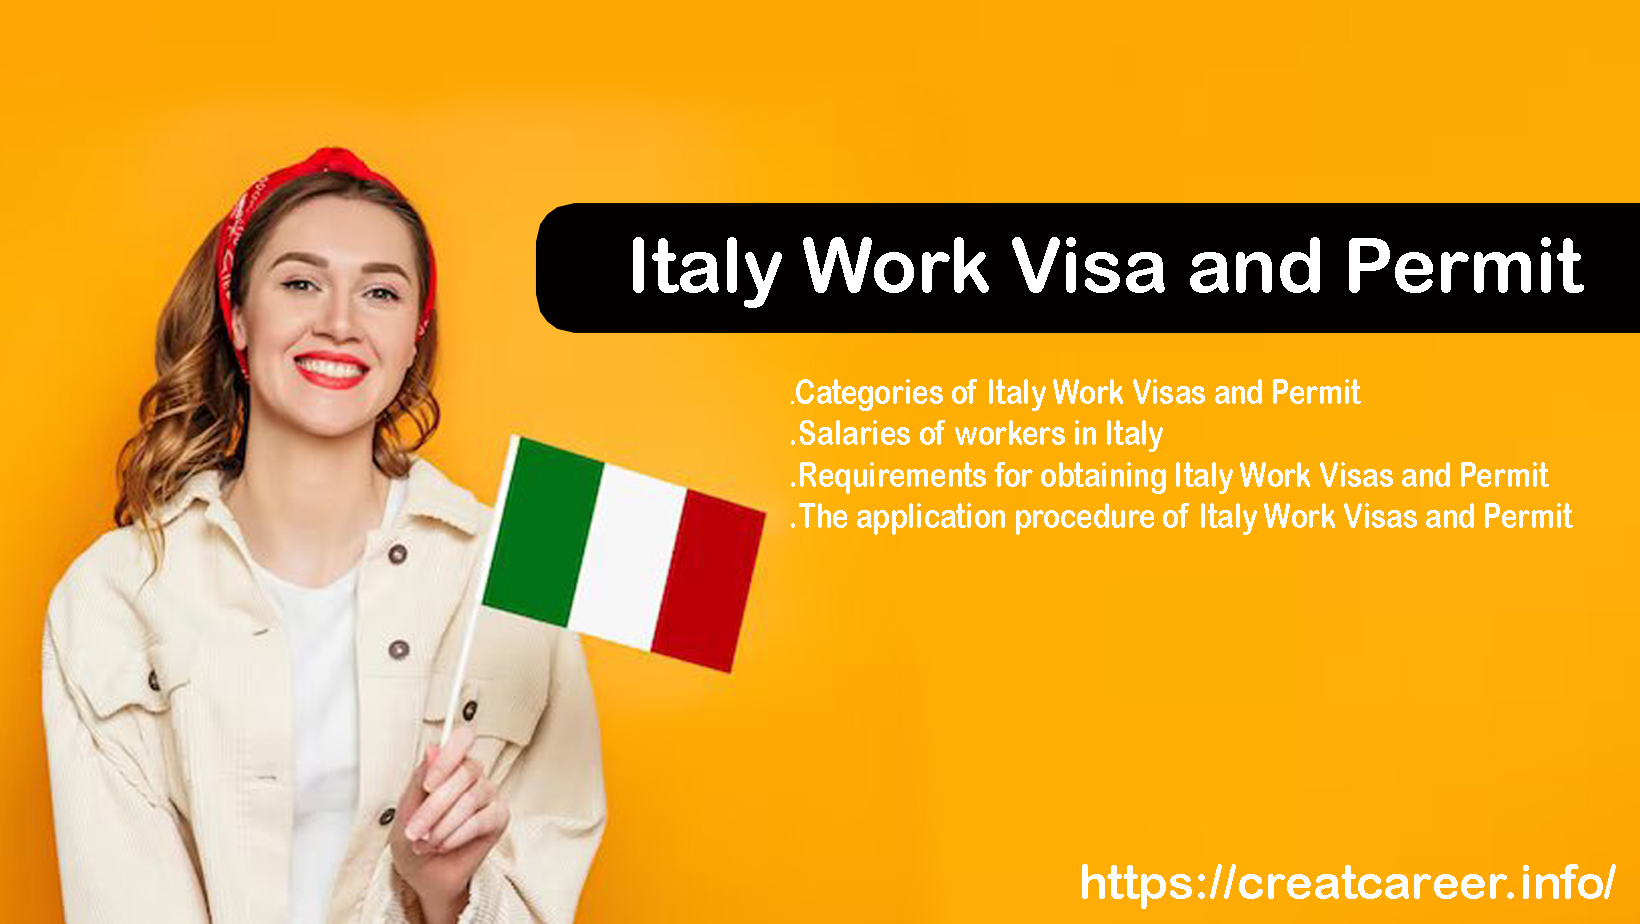 Italy Work Visas and Permit